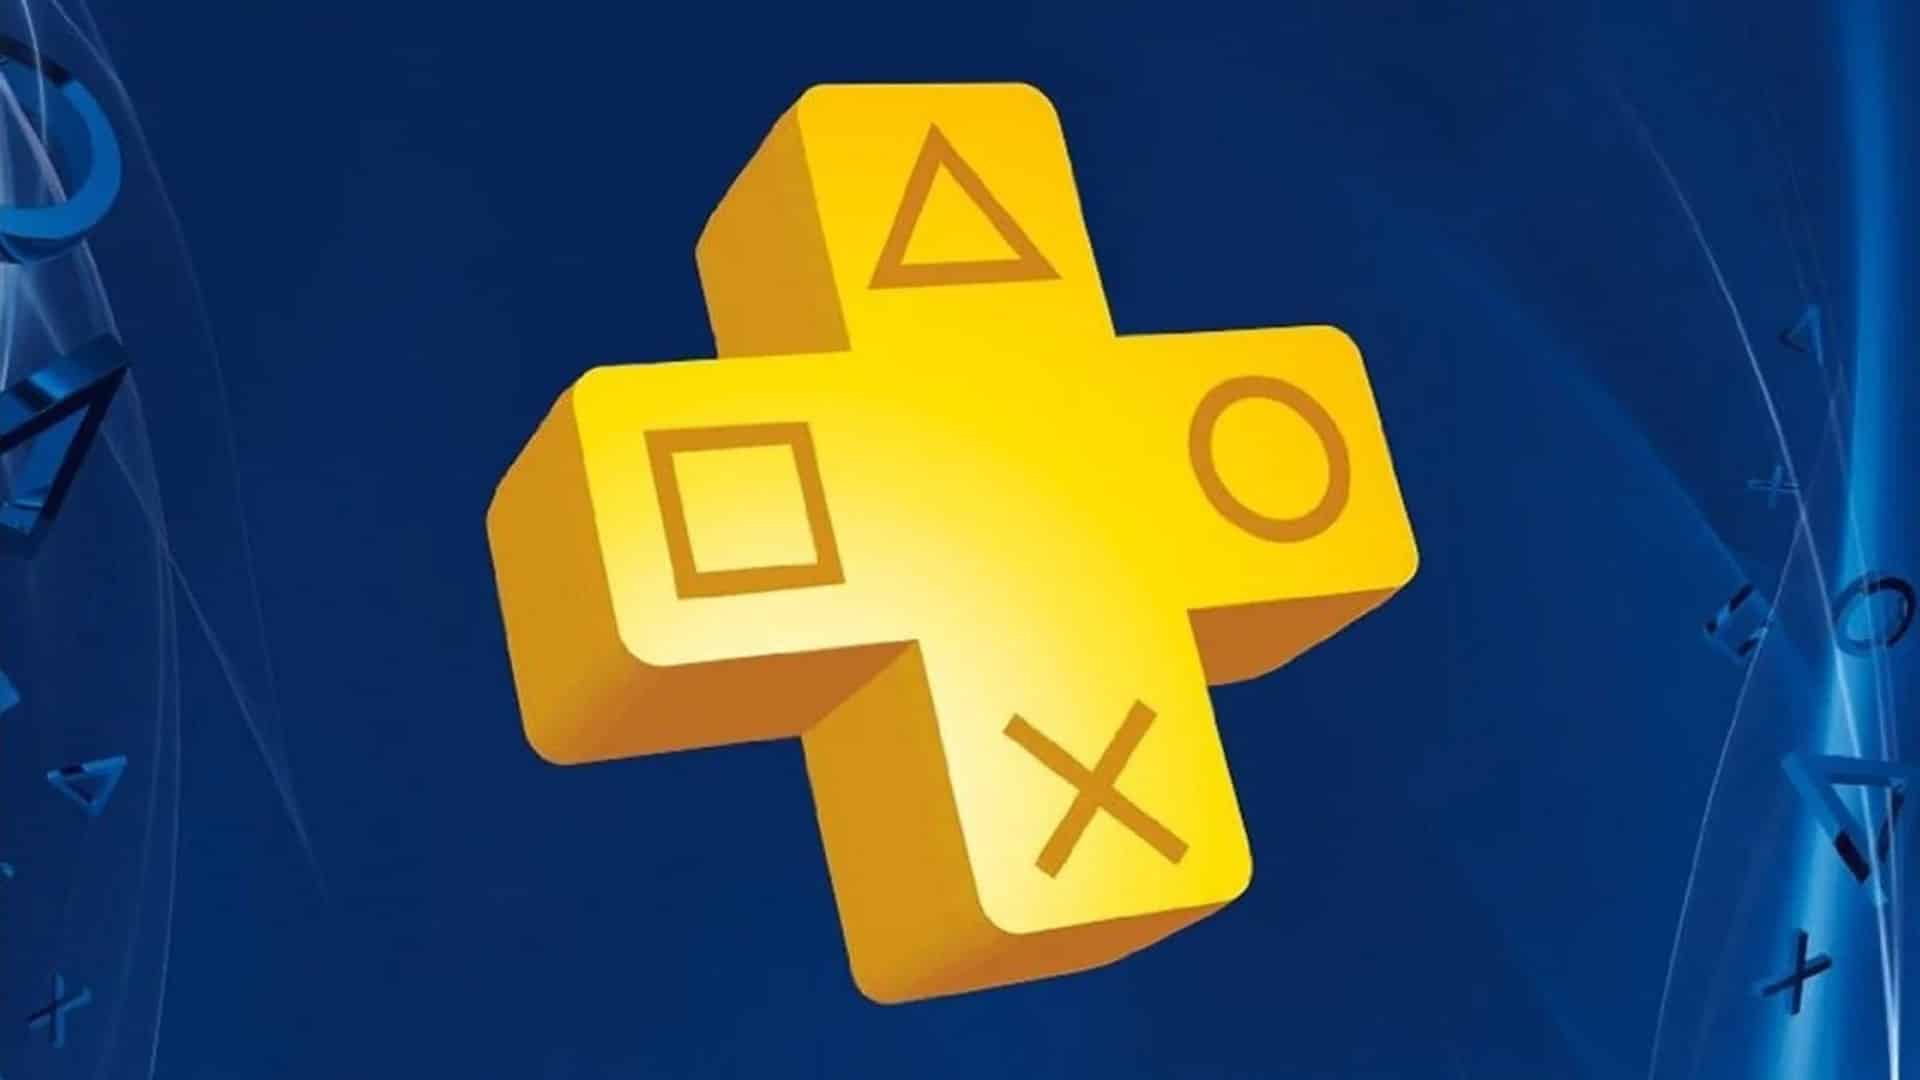 PlayStation Plus in 2021 Was an Abysmal Trainwreck